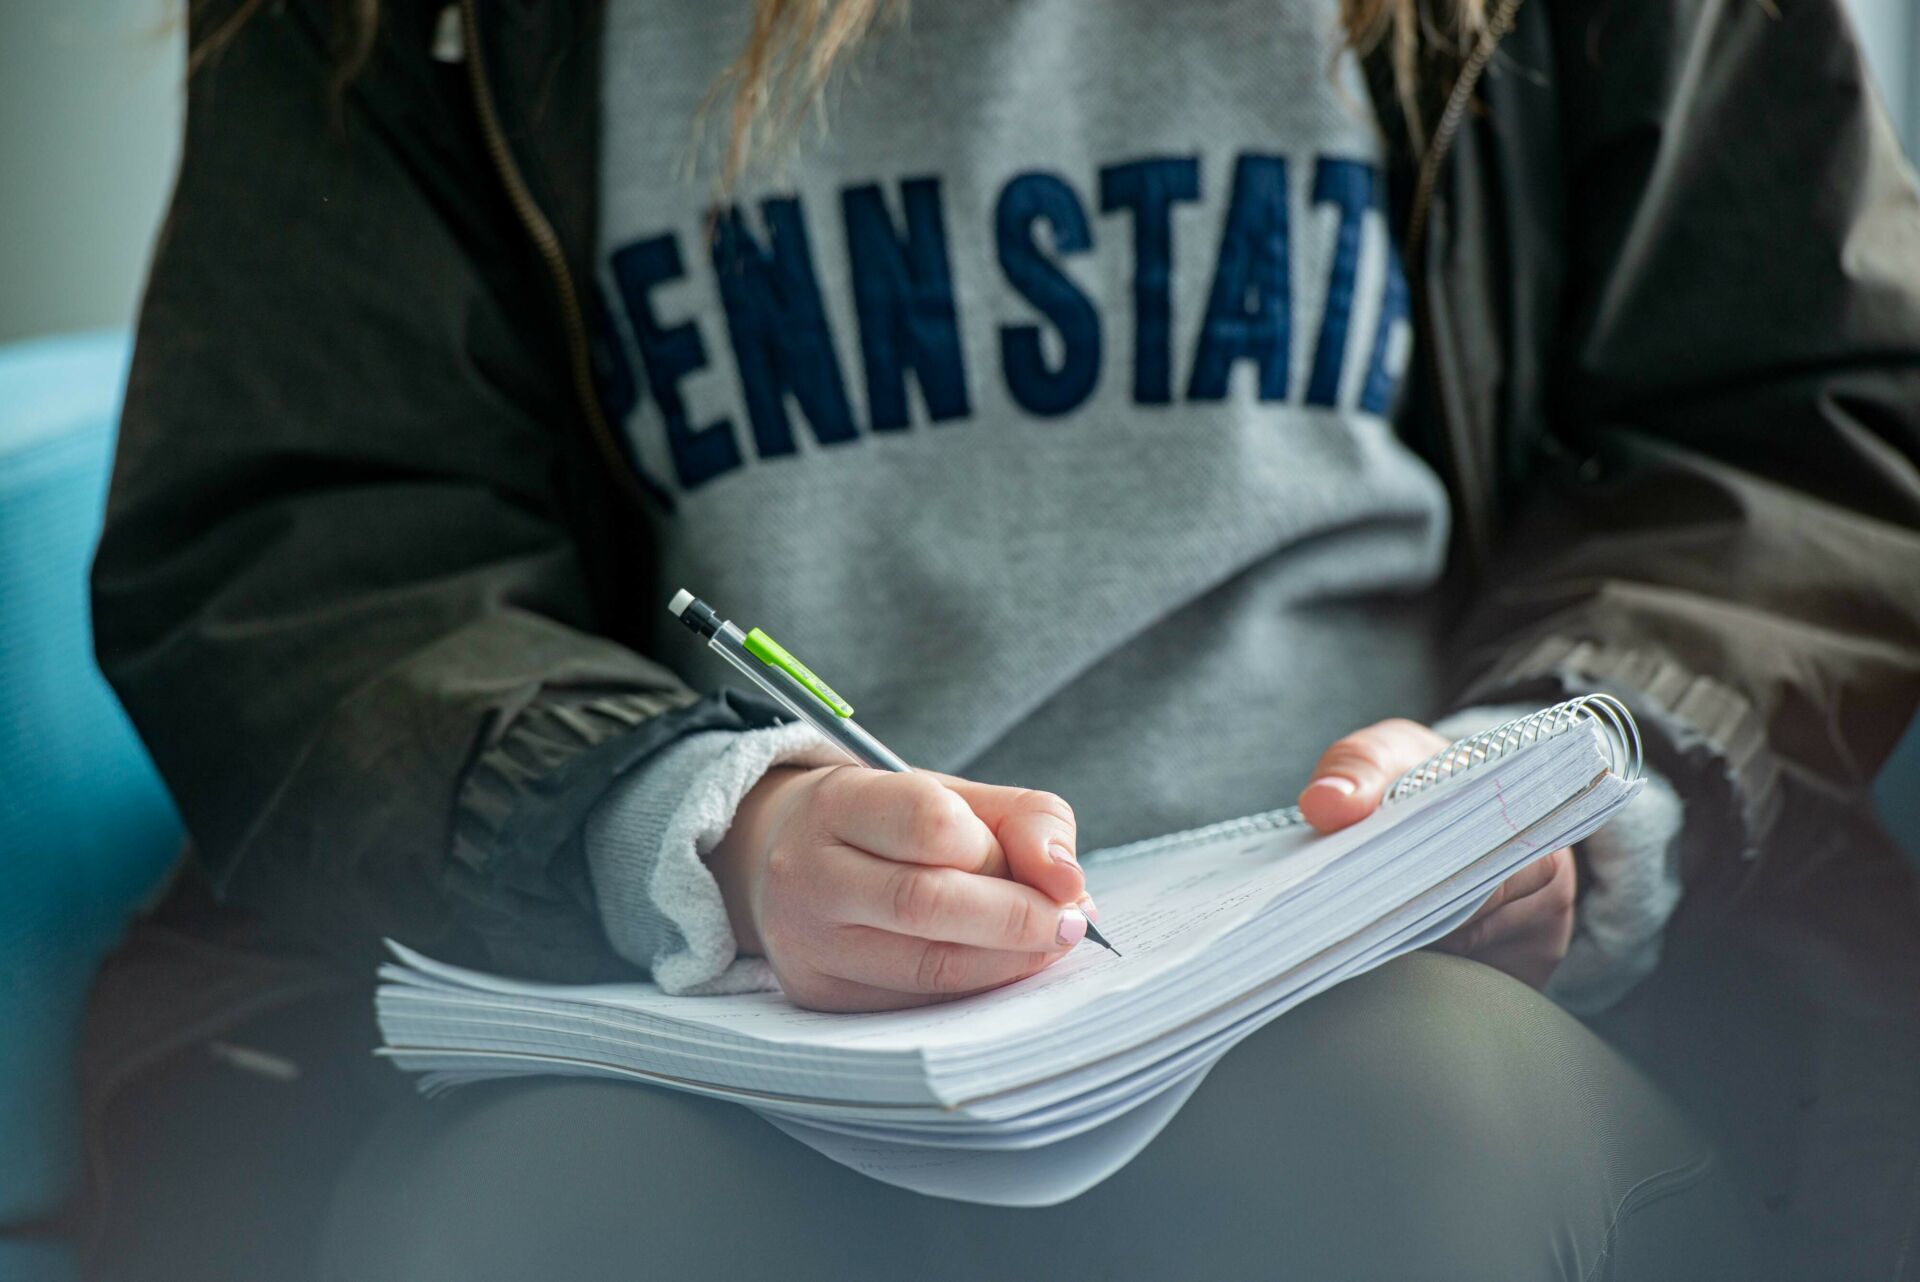 Student in a Penn State sweatshirt writing in a notebook